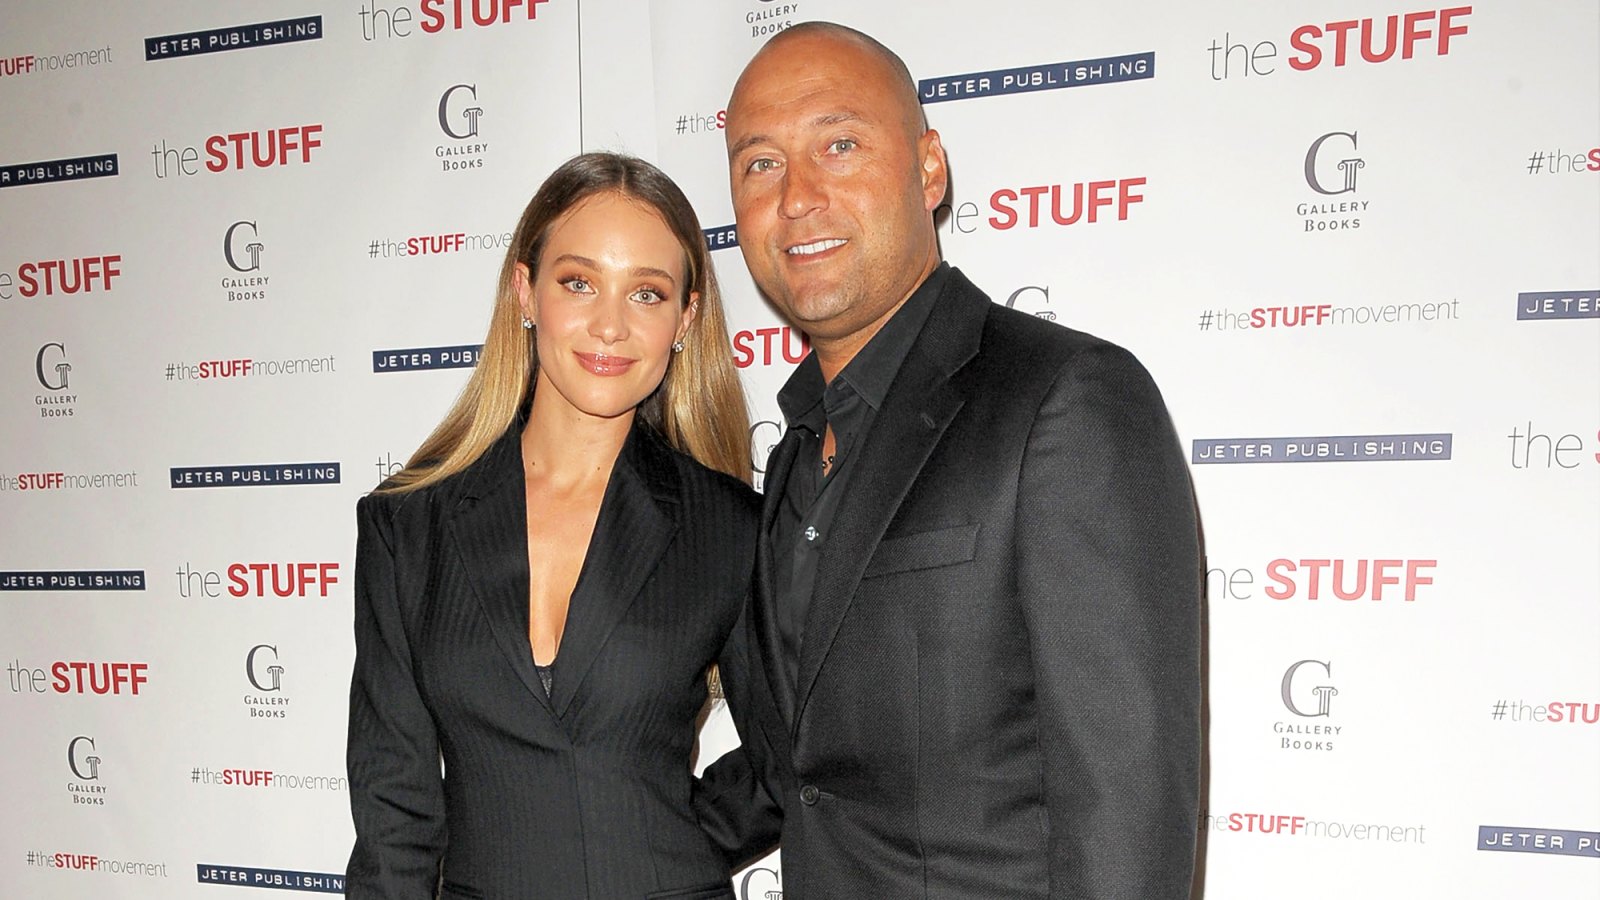 Derek Jeter and wife Hannah attend Dr. Sampson Davis and Sharlee Jeter's "The Stuff" book launch at 48 Lounge on May 14, 2018 in New York City.